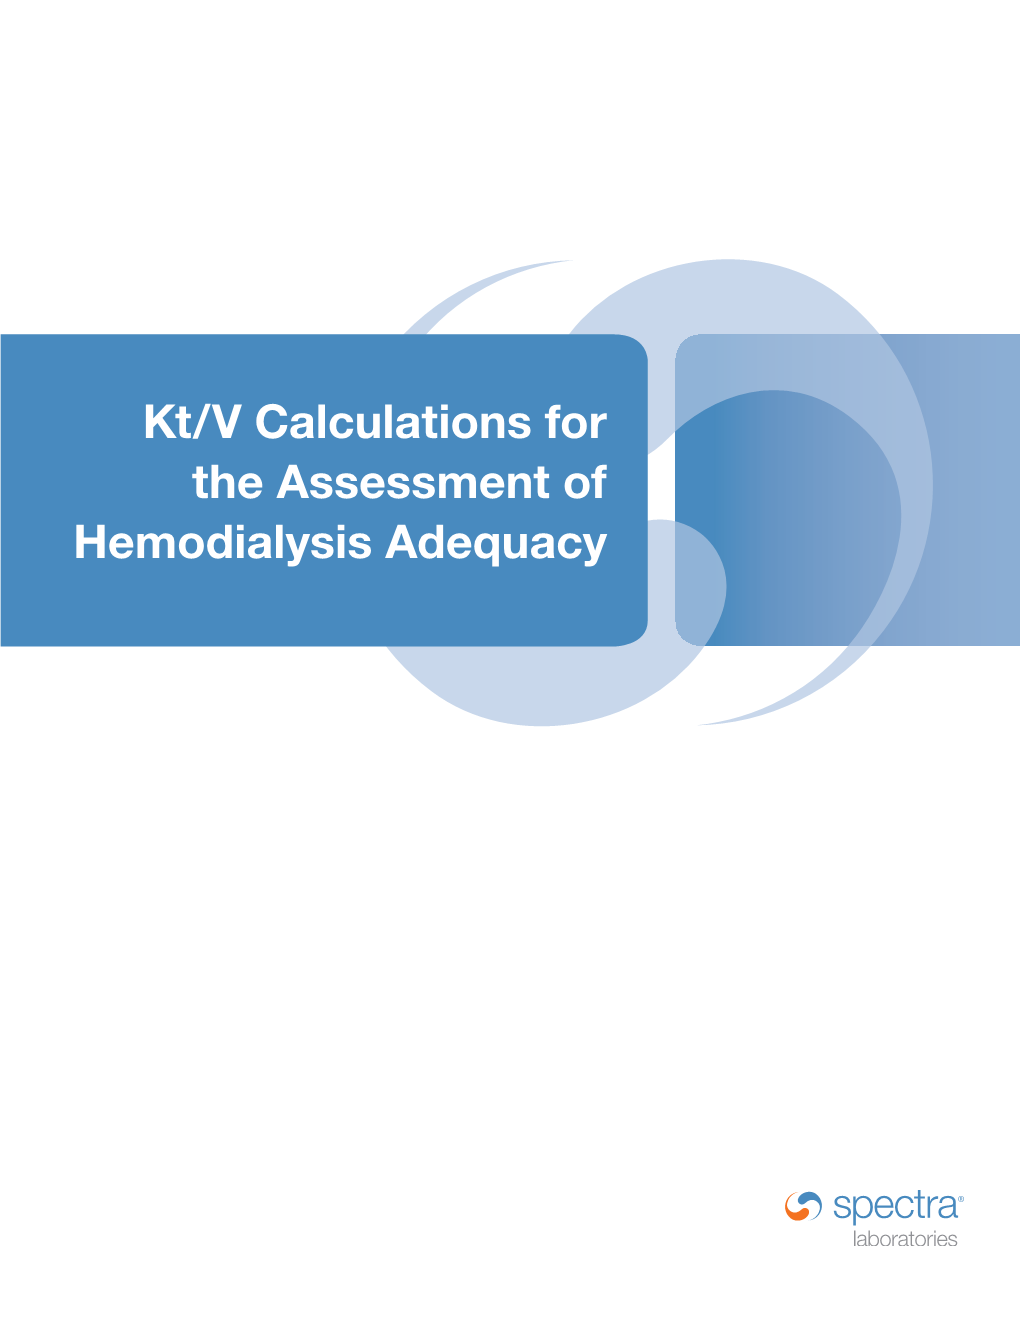 Kt/V Calculations for the Assessment of Hemodialysis Adequacy